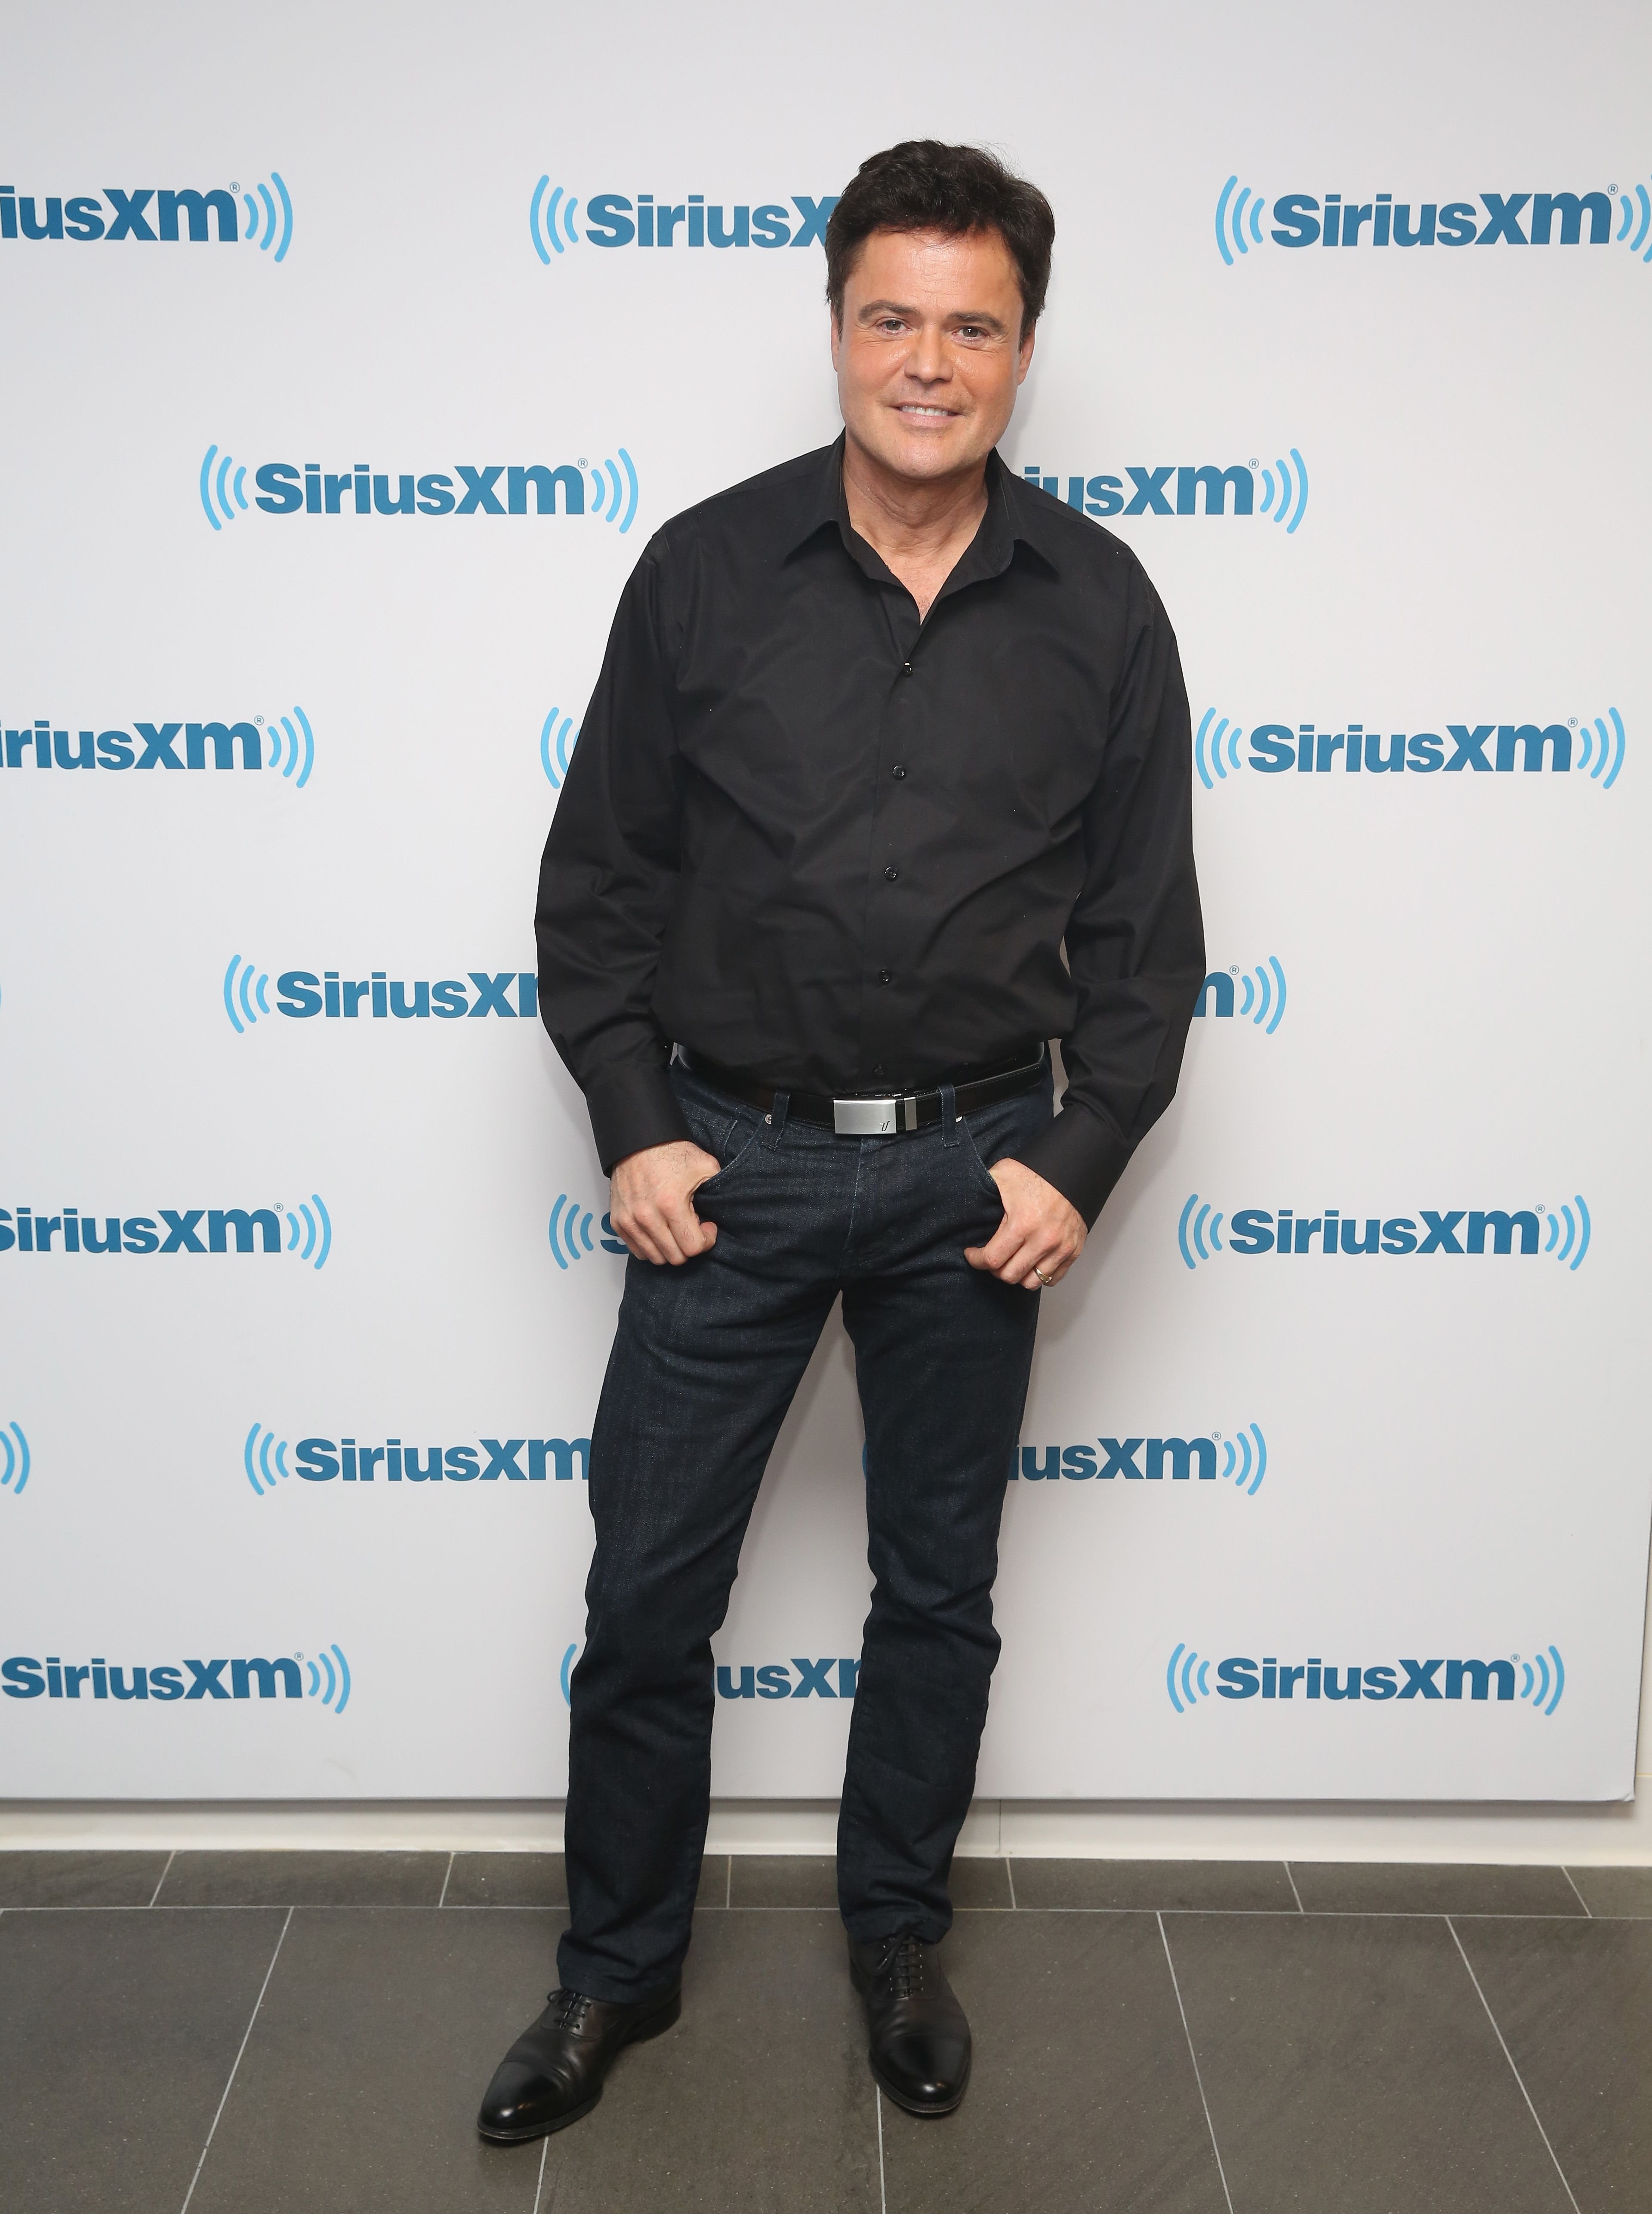 Donny Osmond visits at SiriusXM Studios on January 13, 2015 in New York City. | Photo: Getty Images